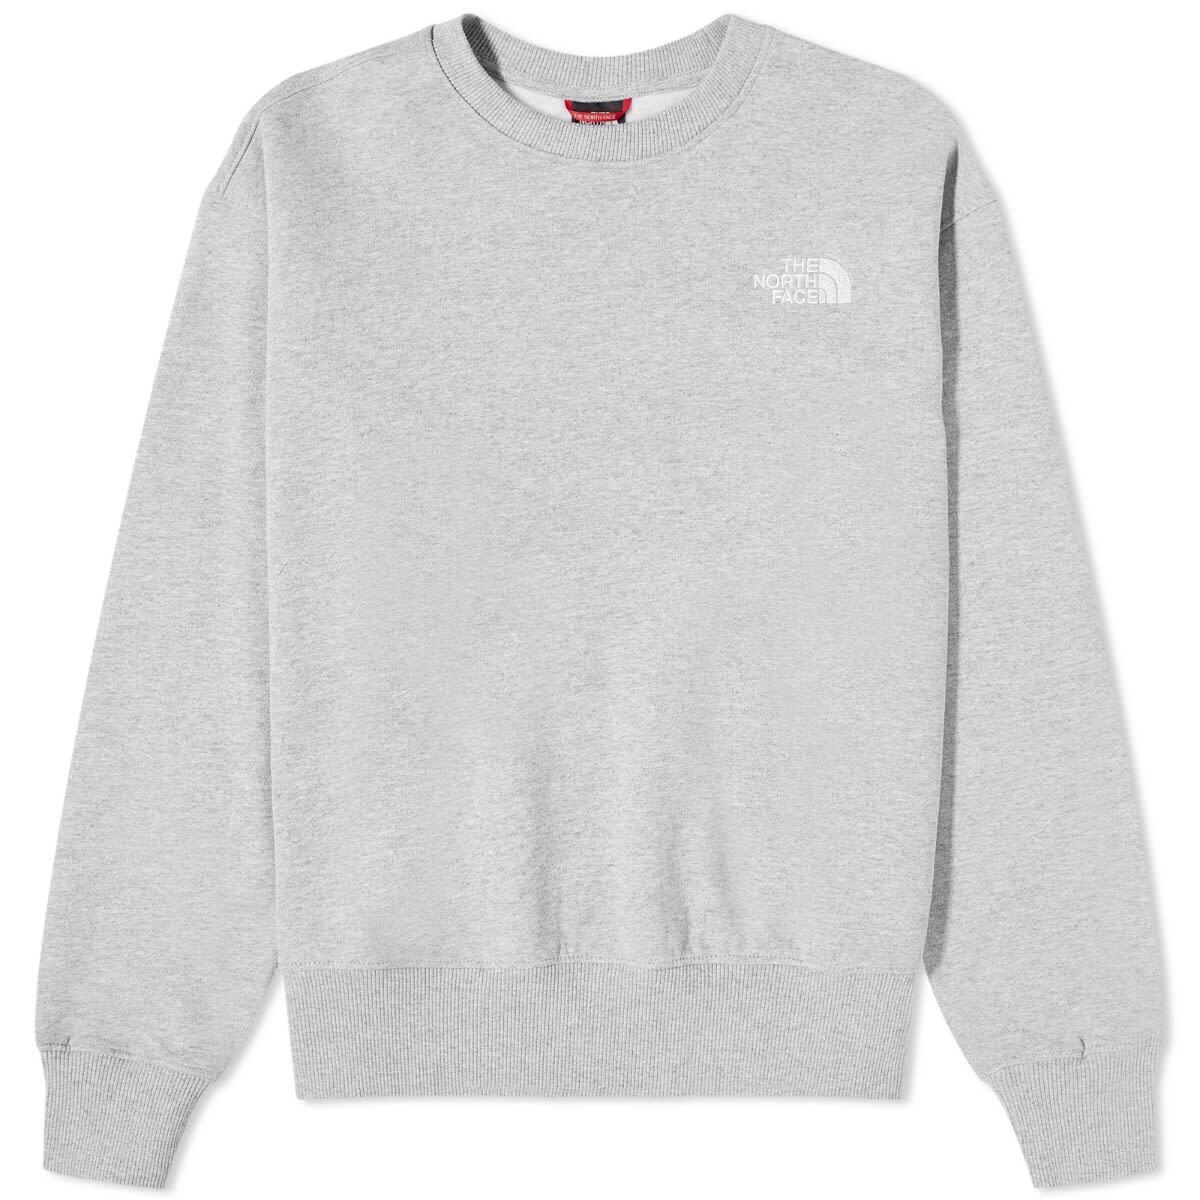 The North Face Women's Essential Crew Sweat in Light Grey Heather